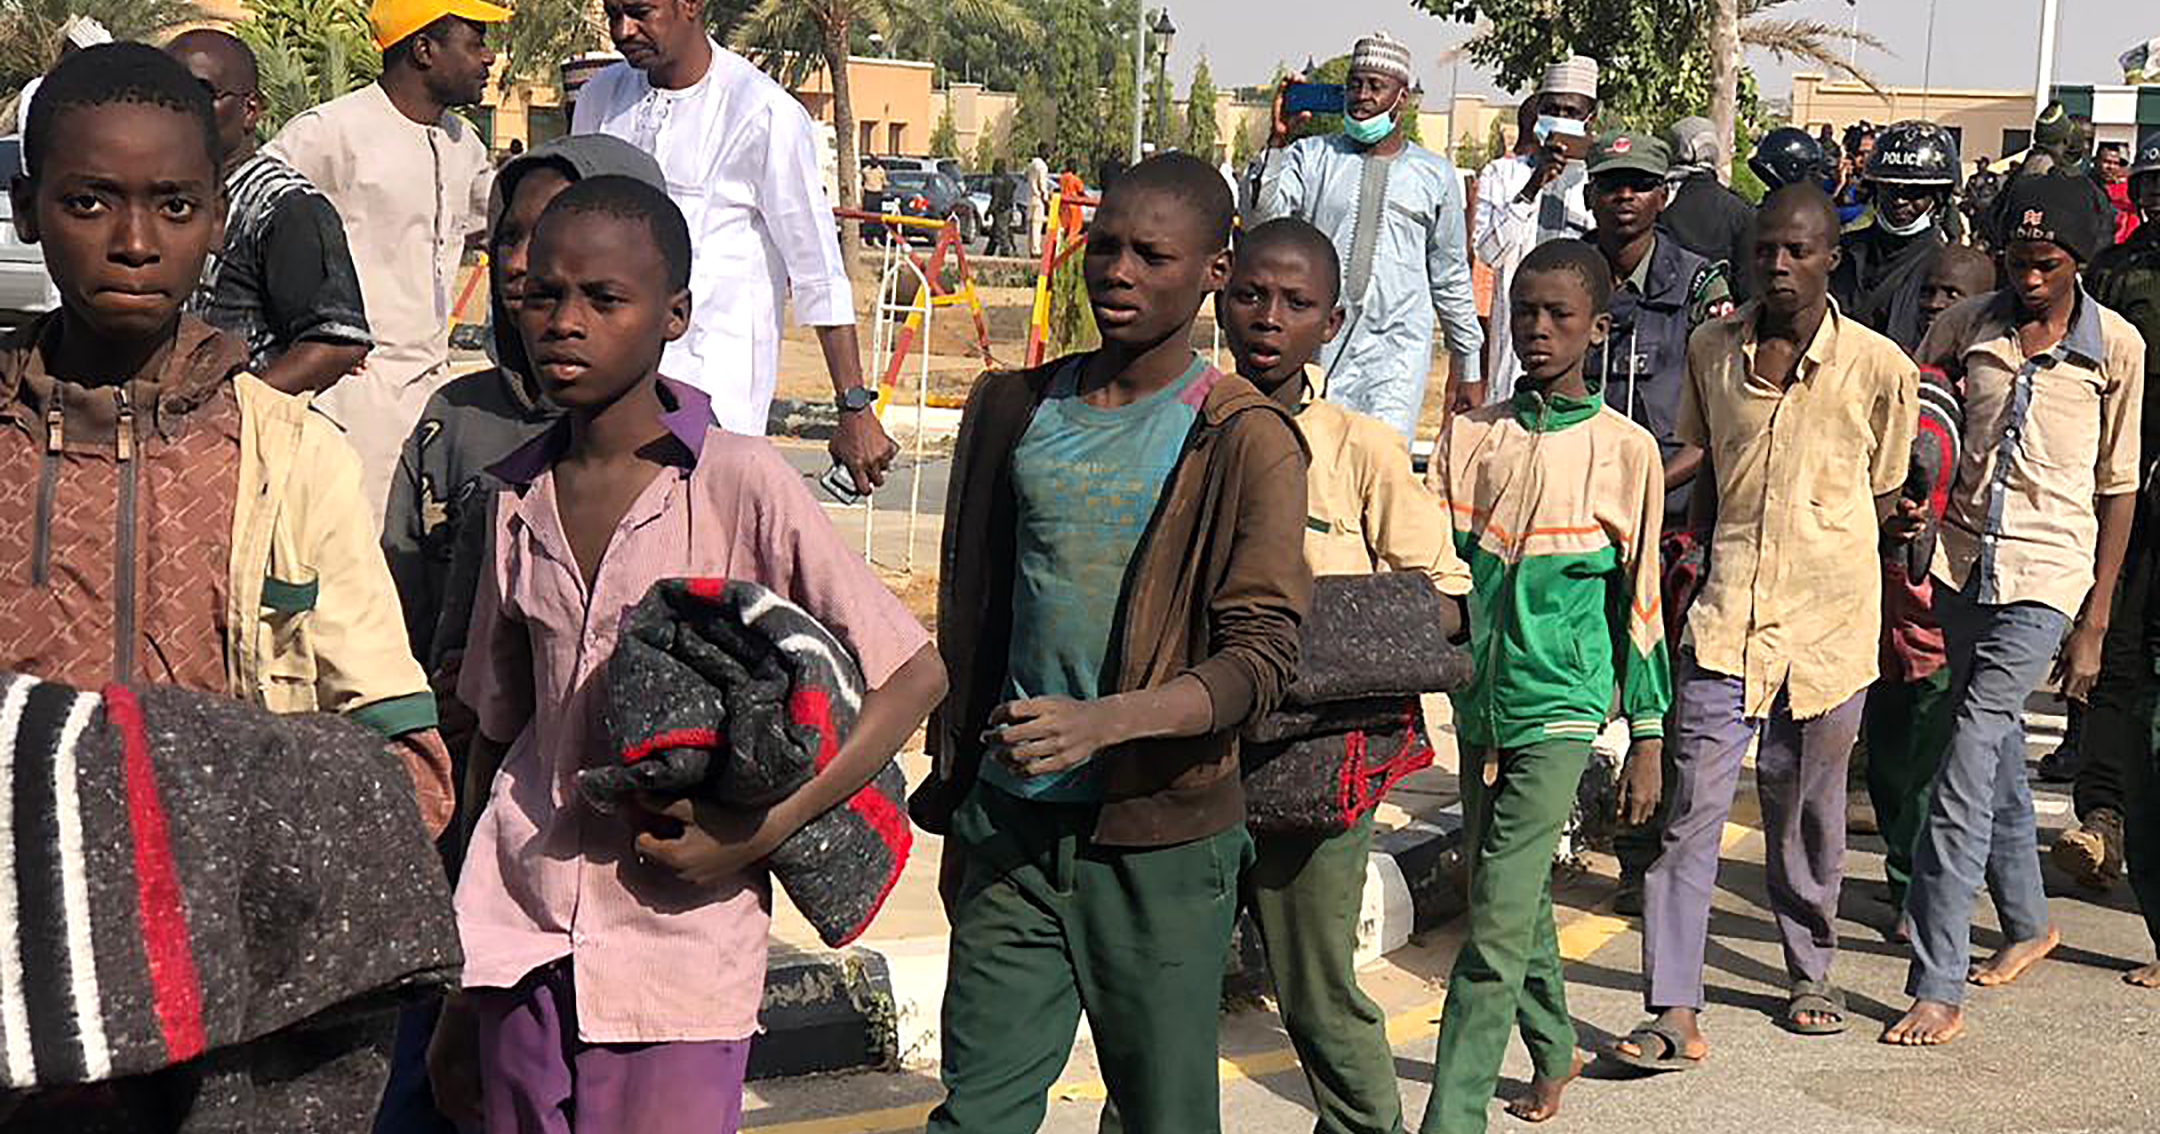 Schoolboys are escorted by the Nigerian military on Dec. 18, 2020, in Katsina state, Nigeria, following their release by their Boko Haram captors.